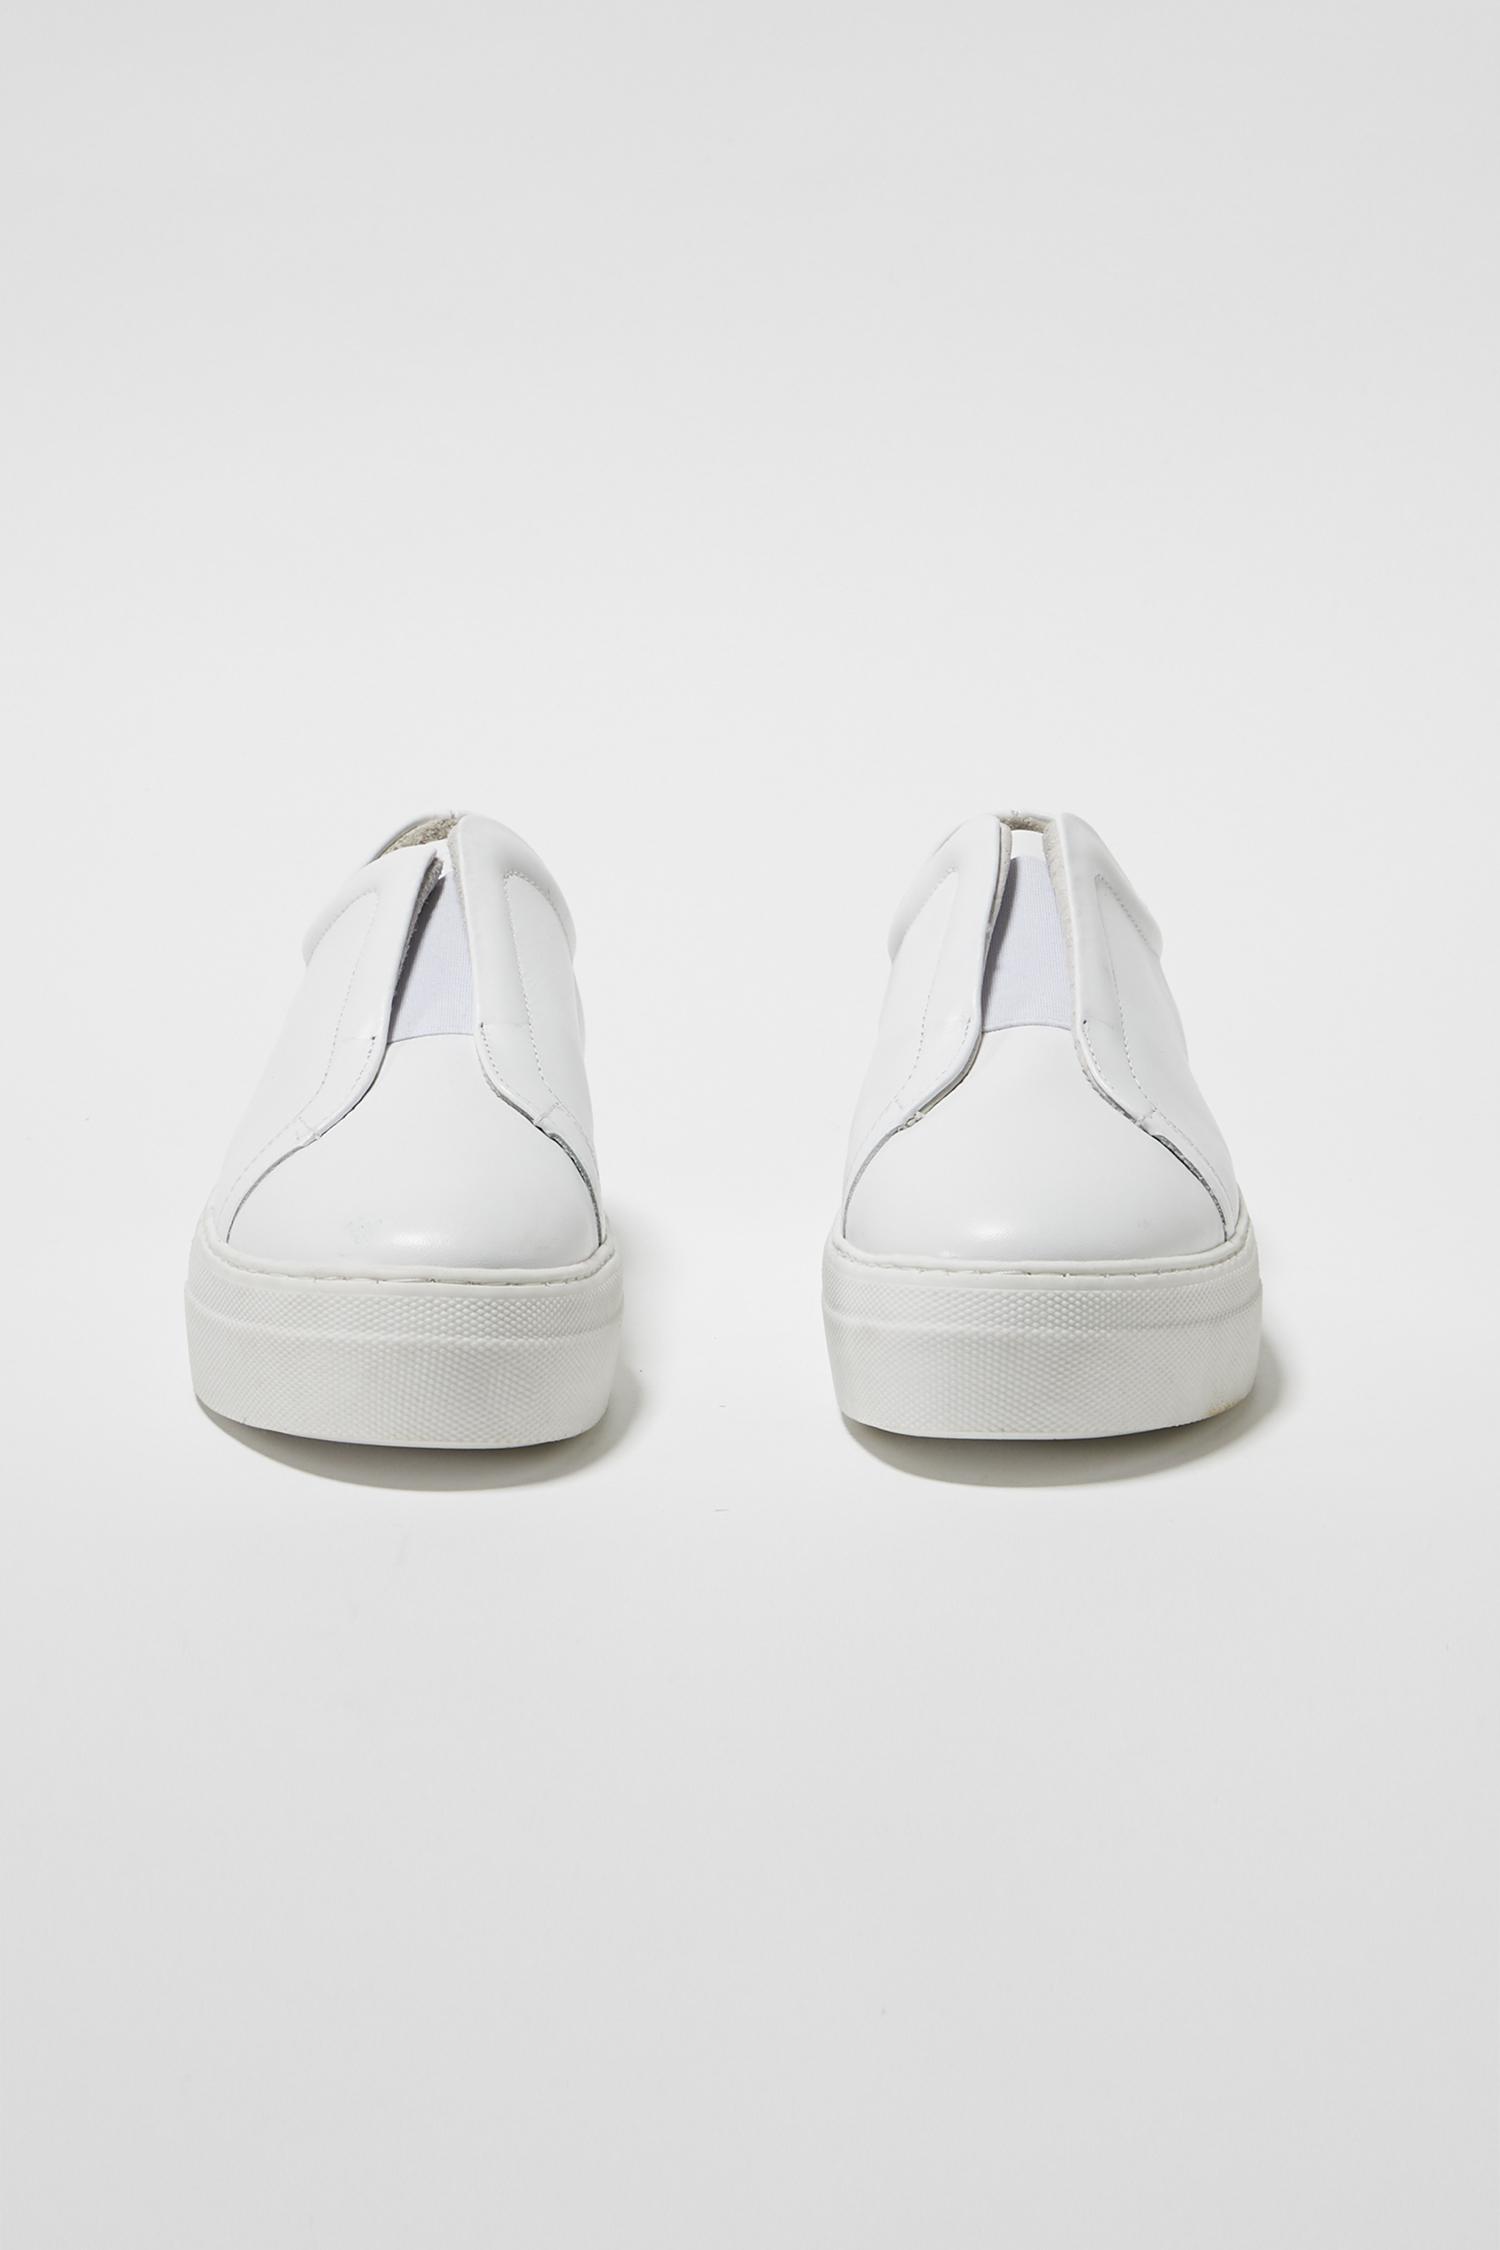 French Connection Denim Sara Elastic Slip On Trainers in White - Lyst